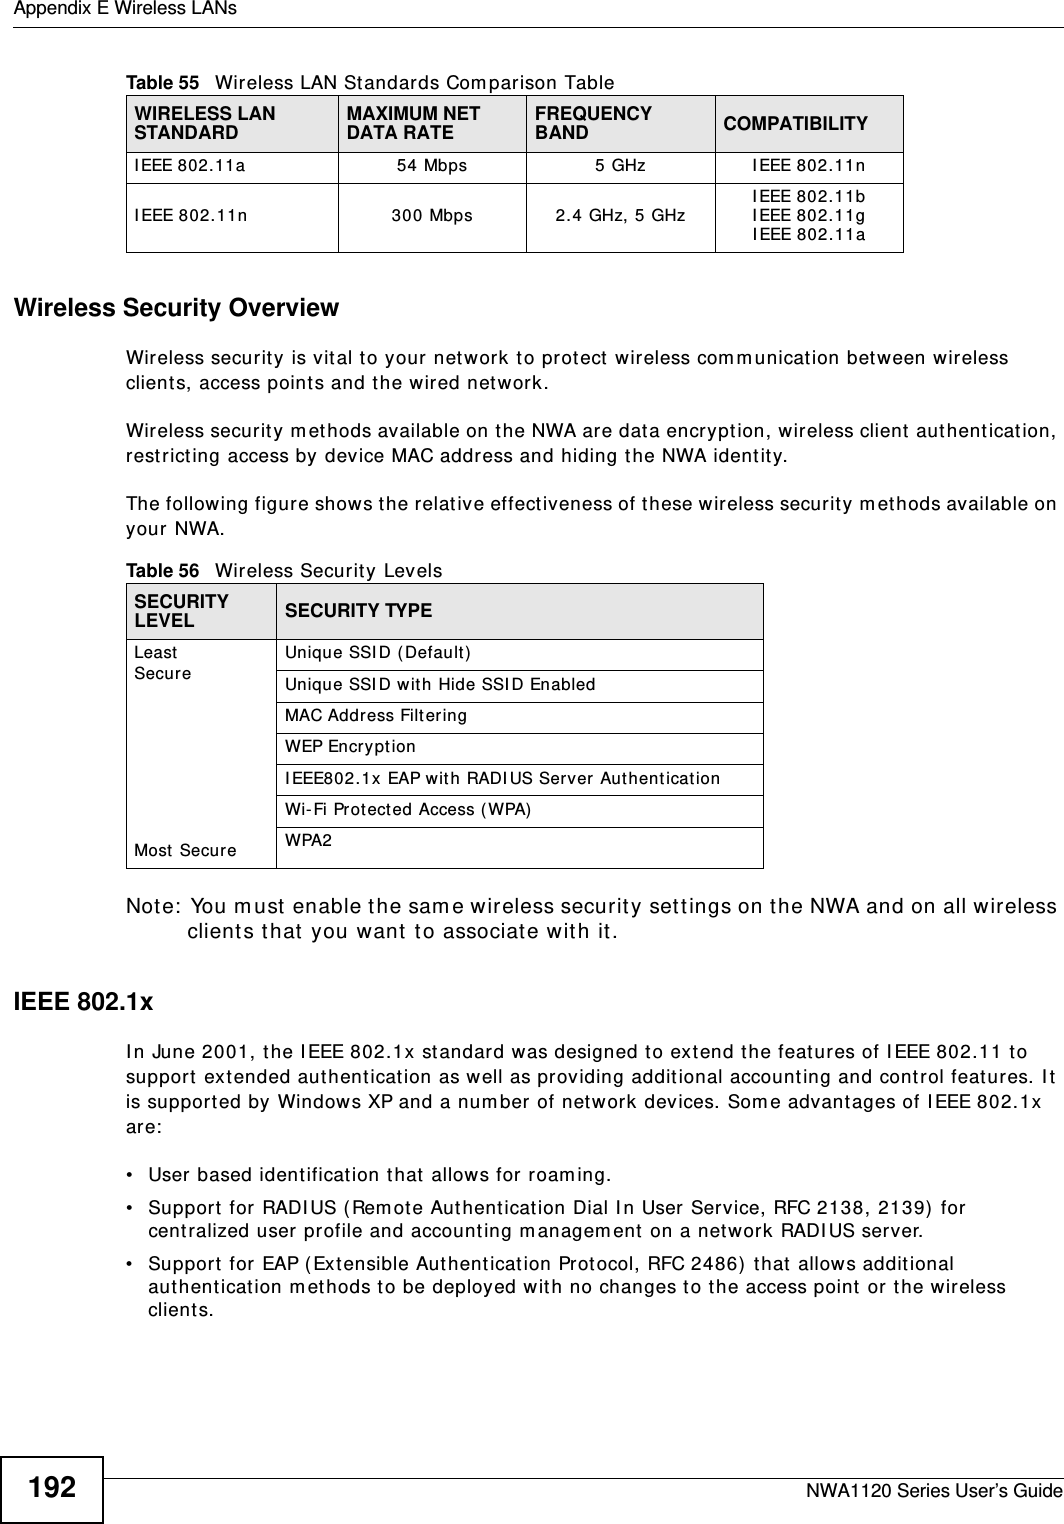 Appendix E Wireless LANsNWA1120 Series User’s Guide192Wireless Security OverviewWireless security is vital to your network to protect wireless communication between wireless clients, access points and the wired network.Wireless security methods available on the NWA are data encryption, wireless client authentication, restricting access by device MAC address and hiding the NWA identity.The following figure shows the relative effectiveness of these wireless security methods available on your NWA.Note: You must enable the same wireless security settings on the NWA and on all wireless clients that you want to associate with it. IEEE 802.1xIn June 2001, the IEEE 802.1x standard was designed to extend the features of IEEE 802.11 to support extended authentication as well as providing additional accounting and control features. It is supported by Windows XP and a number of network devices. Some advantages of IEEE 802.1x are:• User based identification that allows for roaming.• Support for RADIUS (Remote Authentication Dial In User Service, RFC 2138, 2139) for centralized user profile and accounting management on a network RADIUS server. • Support for EAP (Extensible Authentication Protocol, RFC 2486) that allows additional authentication methods to be deployed with no changes to the access point or the wireless clients. IEEE 802.11a54 Mbps 5 GHz IEEE 802.11nIEEE 802.11n 300 Mbps 2.4 GHz, 5 GHz IEEE 802.11bIEEE 802.11gIEEE 802.11aTable 55   Wireless LAN Standards Comparison TableWIRELESS LAN STANDARD MAXIMUM NET DATA RATE FREQUENCY BAND COMPATIBILITYTable 56   Wireless Security LevelsSECURITY LEVEL SECURITY TYPELeast       Secure                                                                                  Most SecureUnique SSID (Default)Unique SSID with Hide SSID EnabledMAC Address FilteringWEP EncryptionIEEE802.1x EAP with RADIUS Server AuthenticationWi-Fi Protected Access (WPA)WPA2